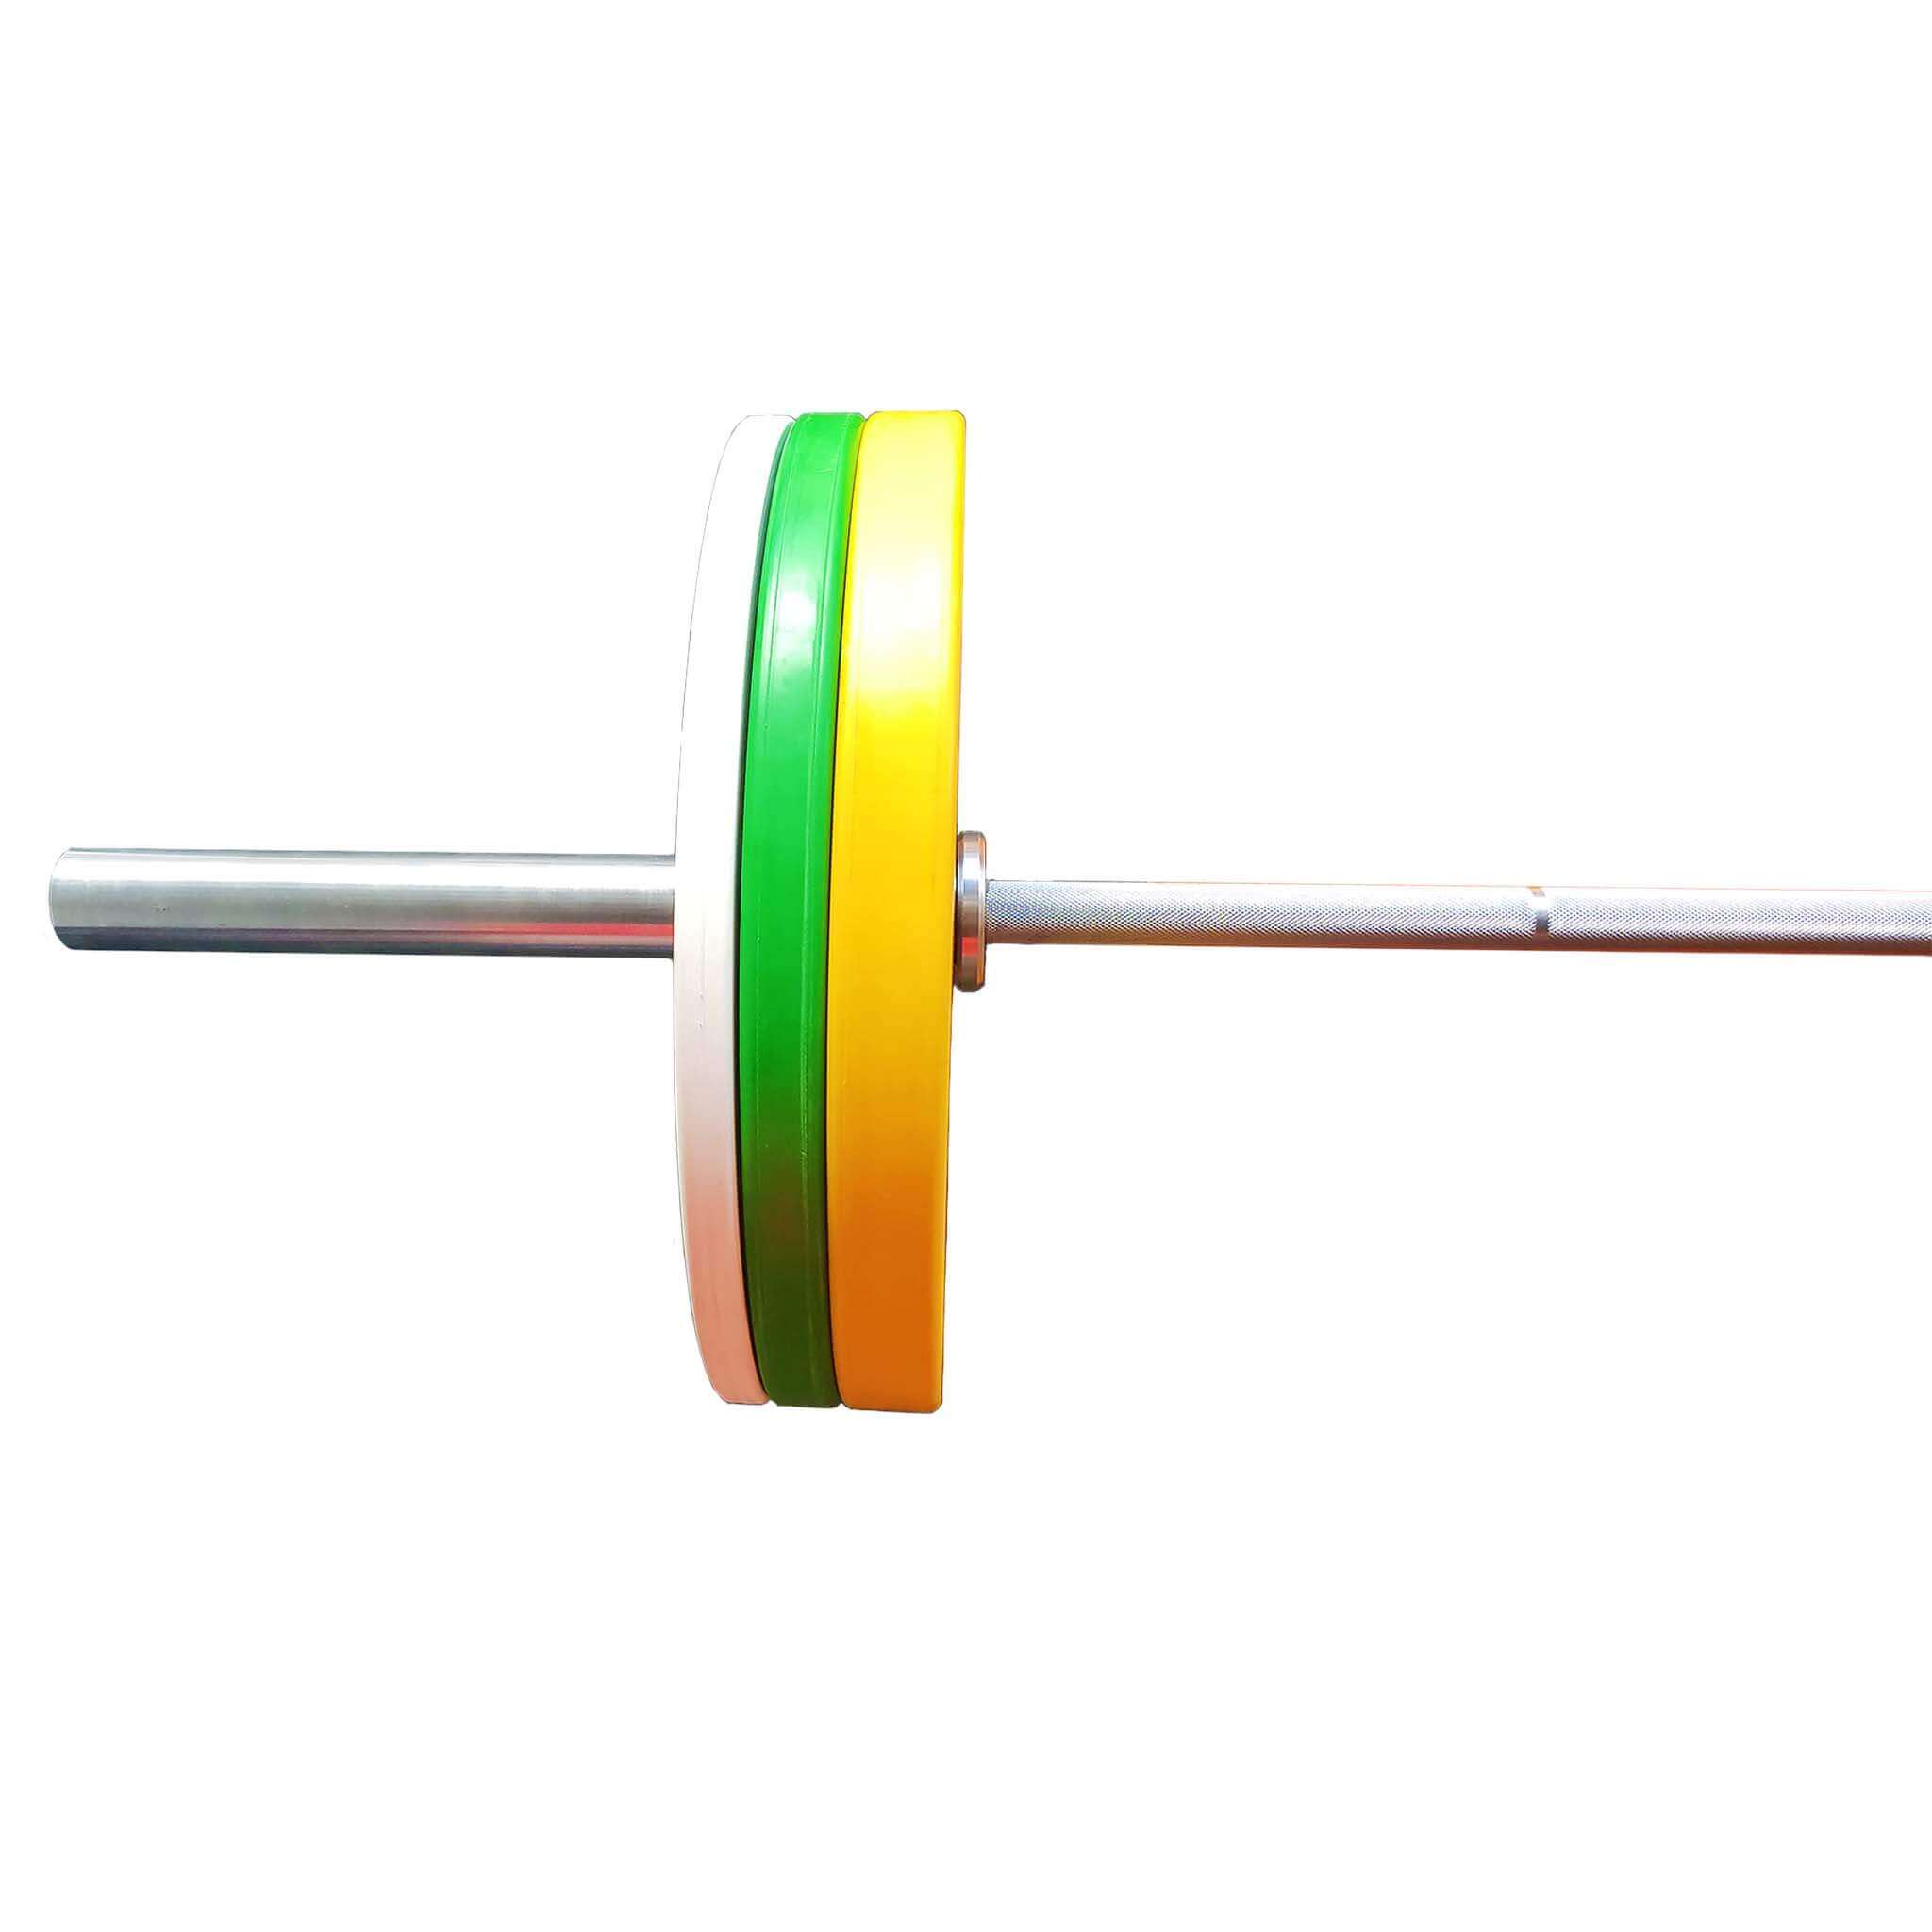 2.2m Powerlifting Straight Bar 2000lb | Barbells | INSOURCE